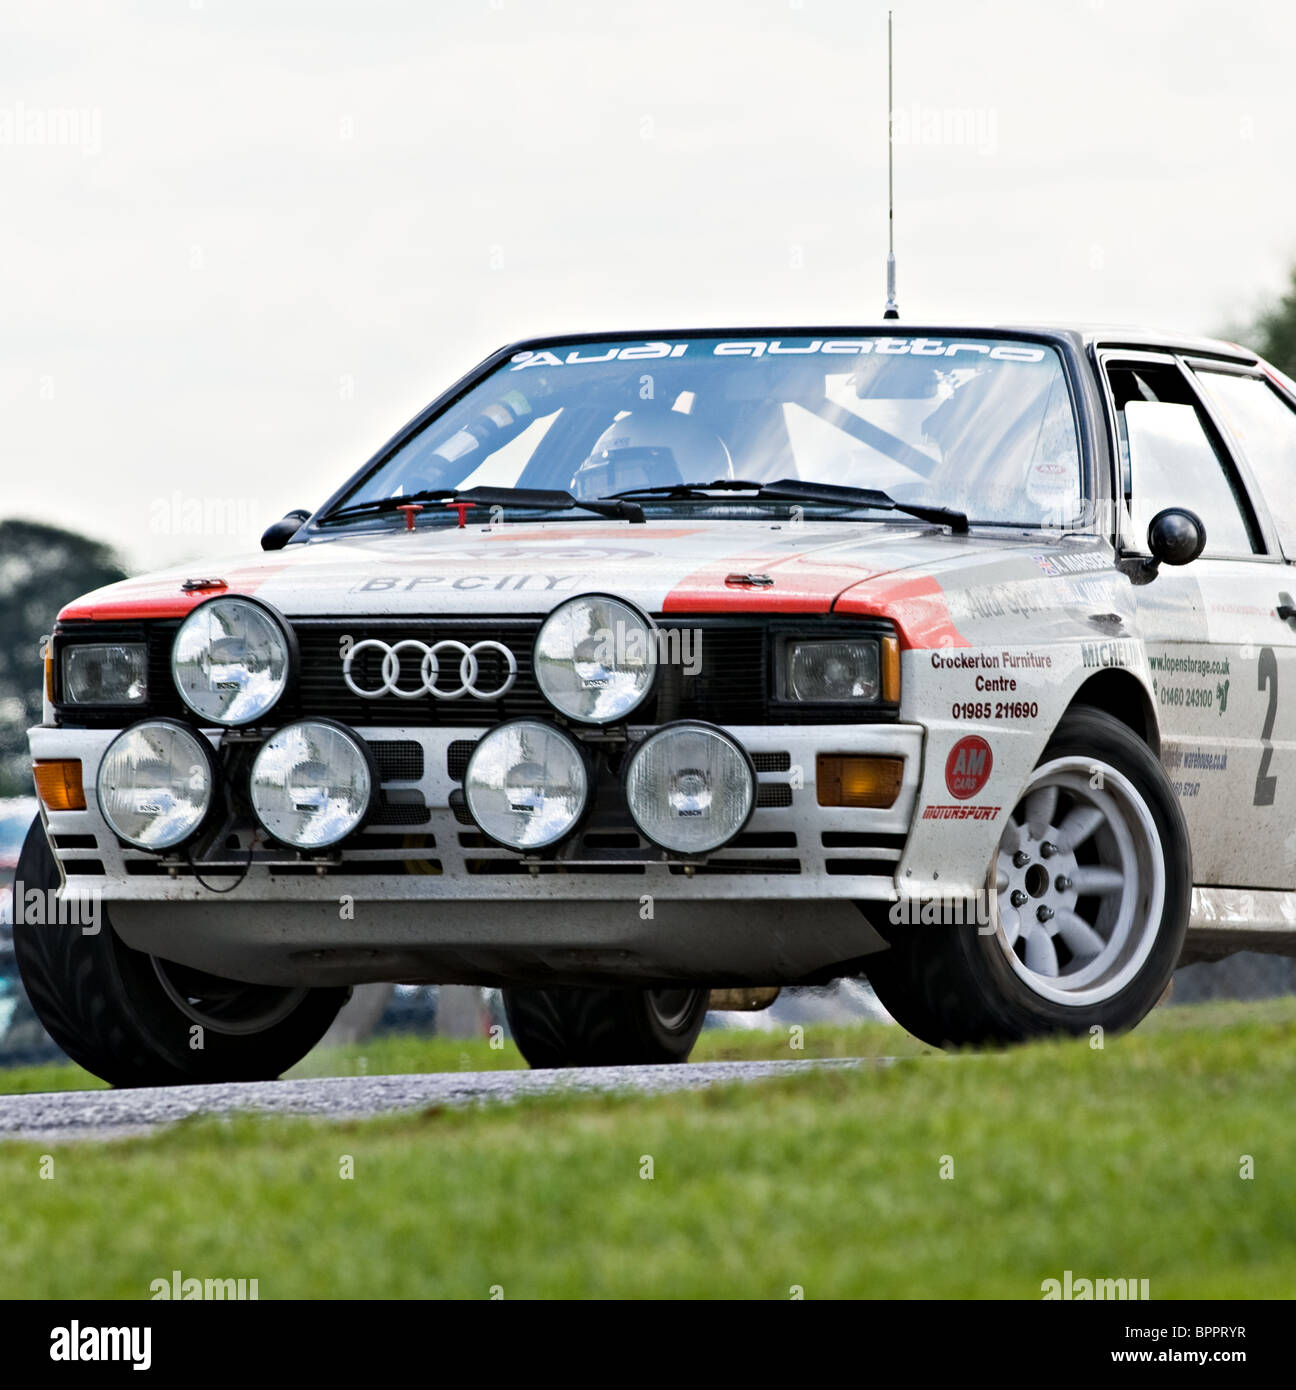 C300CWY Audi quattro Rhd historics, vintage motors and collectibles 2019;  Leighton Hall transport collection of cars & veteran vehicles of yesteryear  Stock Photo - Alamy